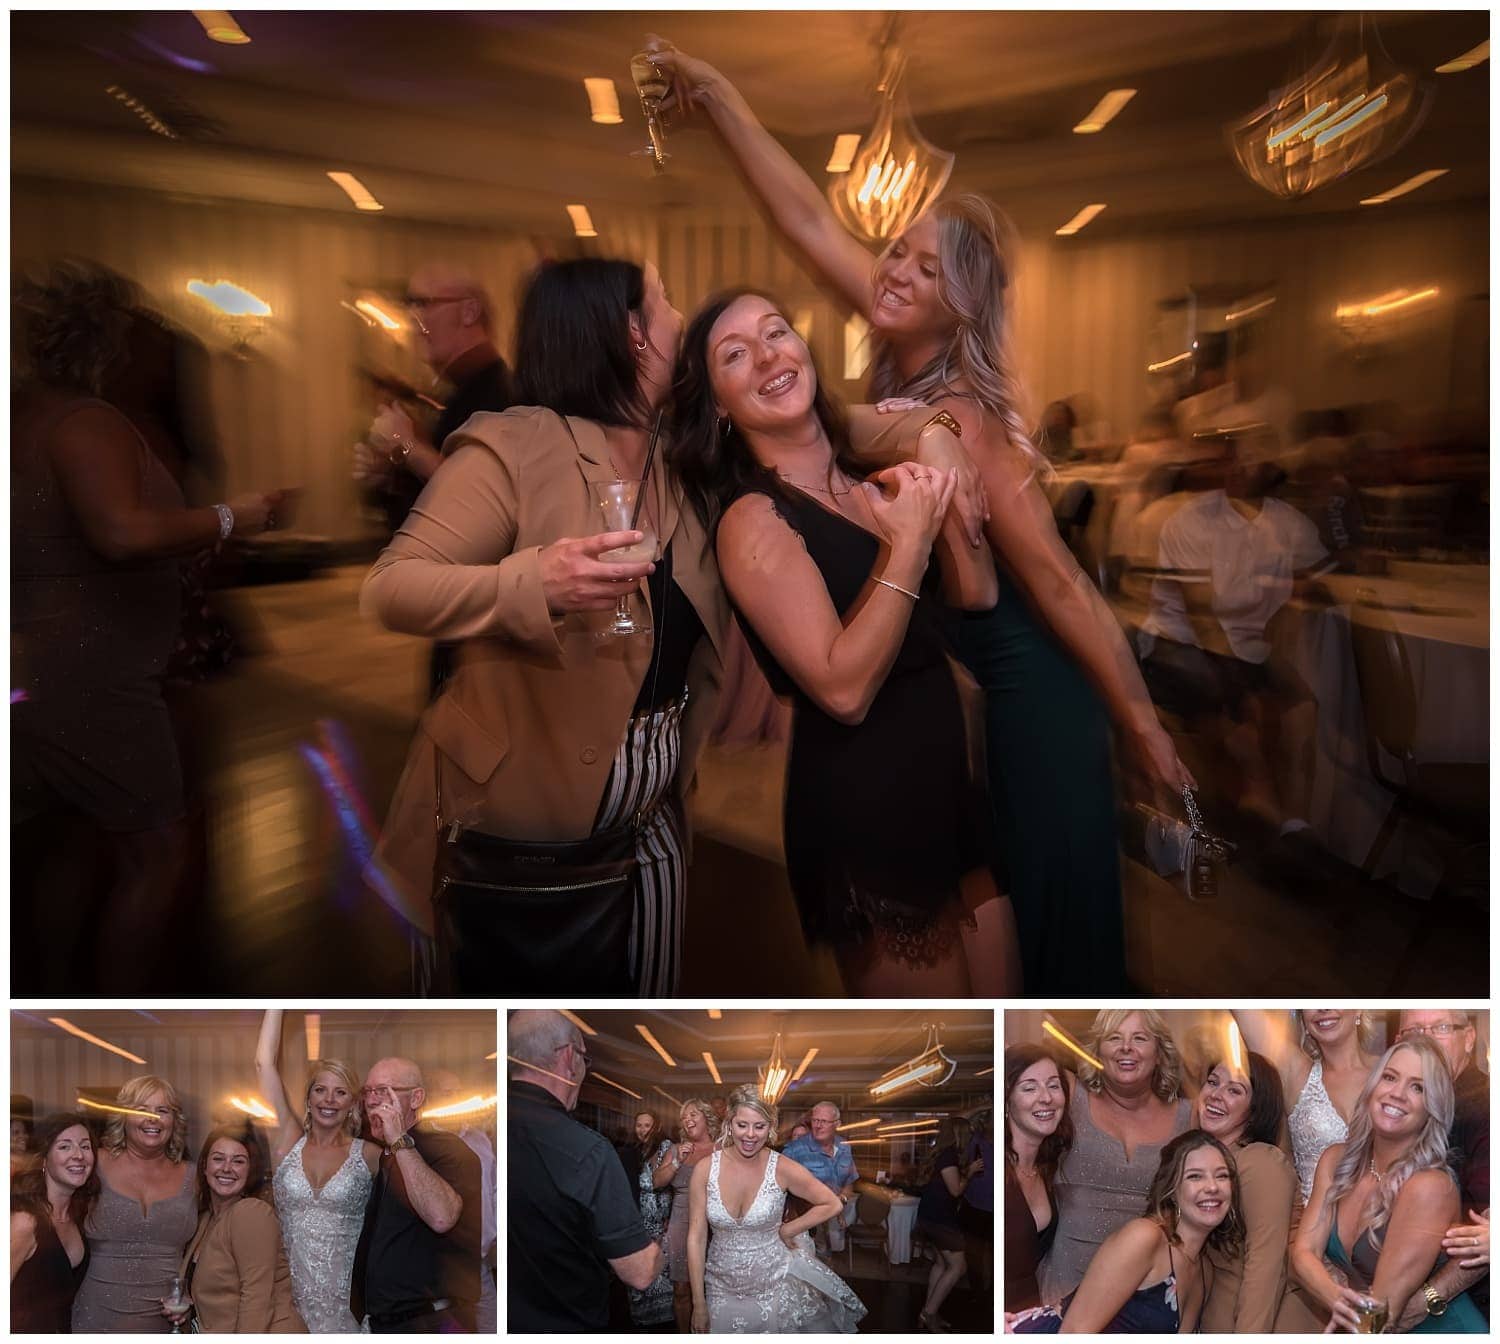 Wedding guests dancing with the bride during her wedding reception at the Ashburn golf club.